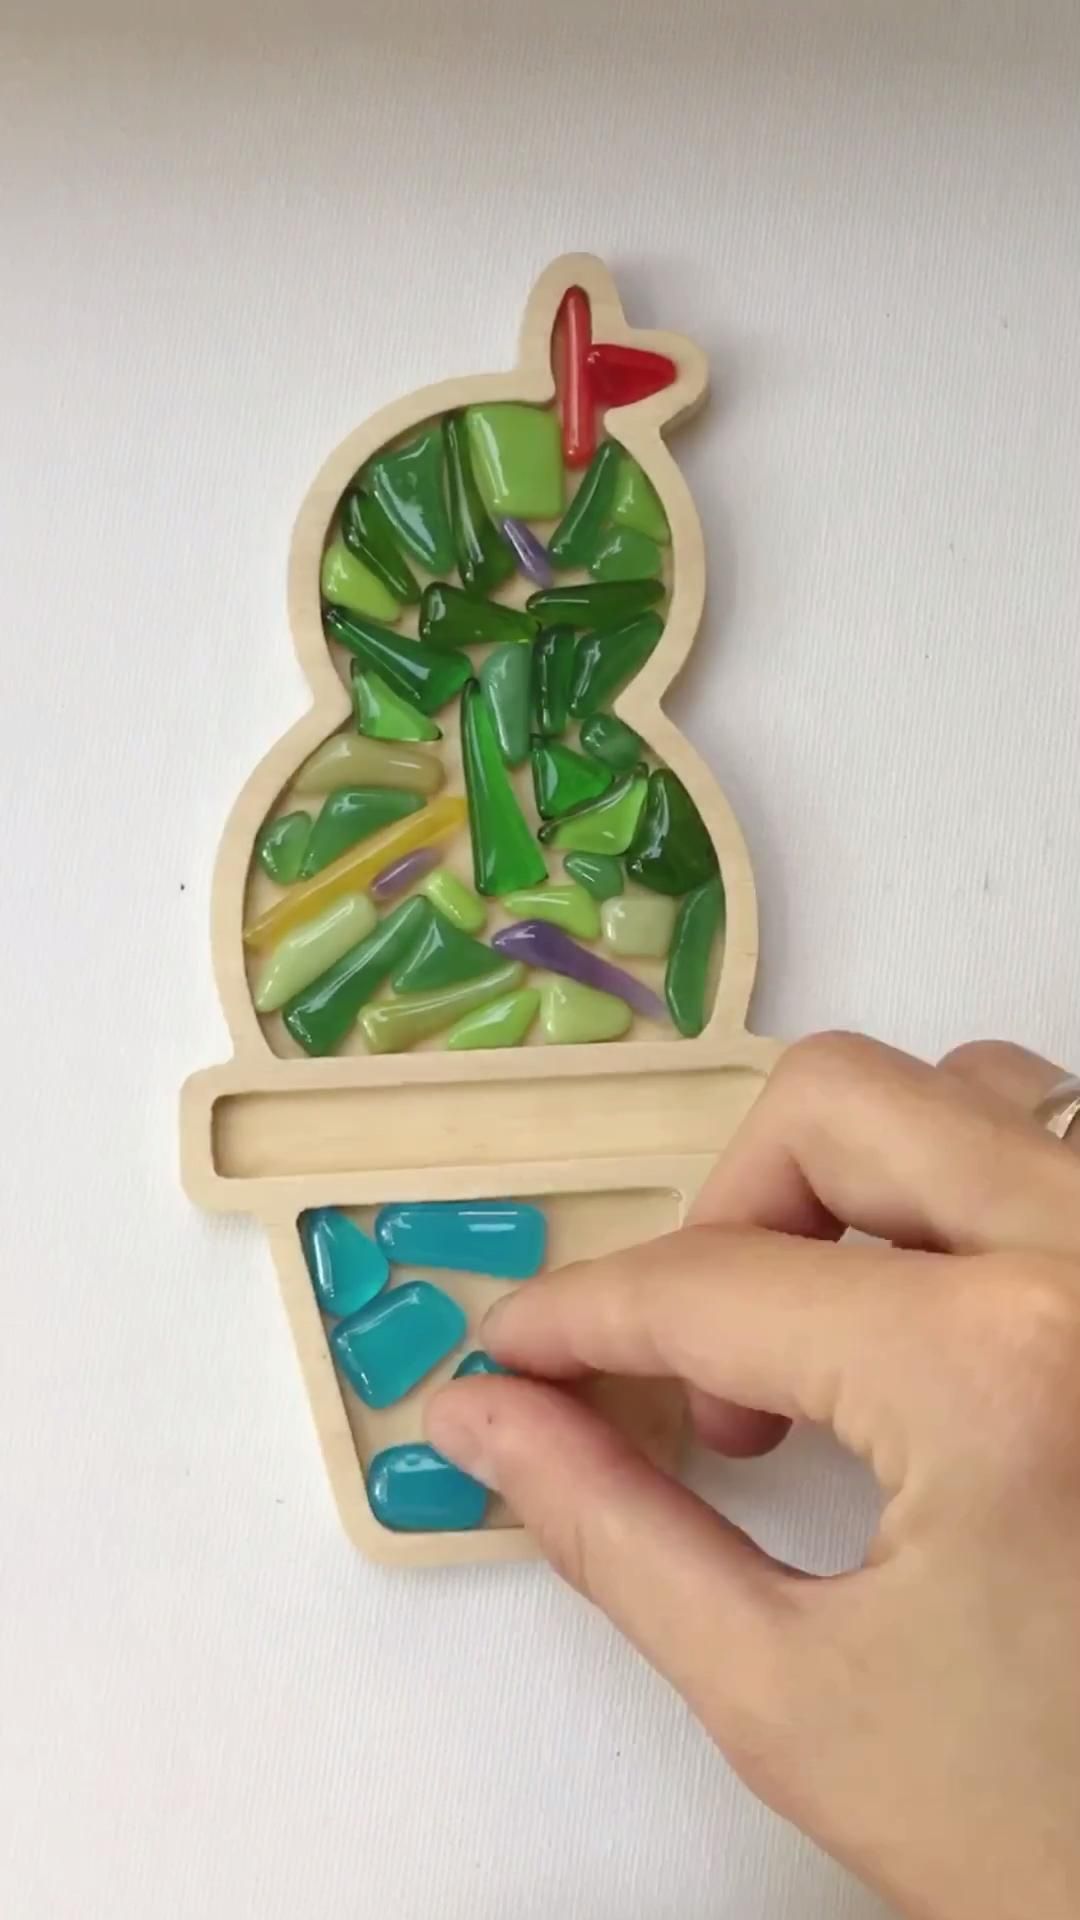 Stained glass art project for kids -   18 diy projects for kids boys ideas